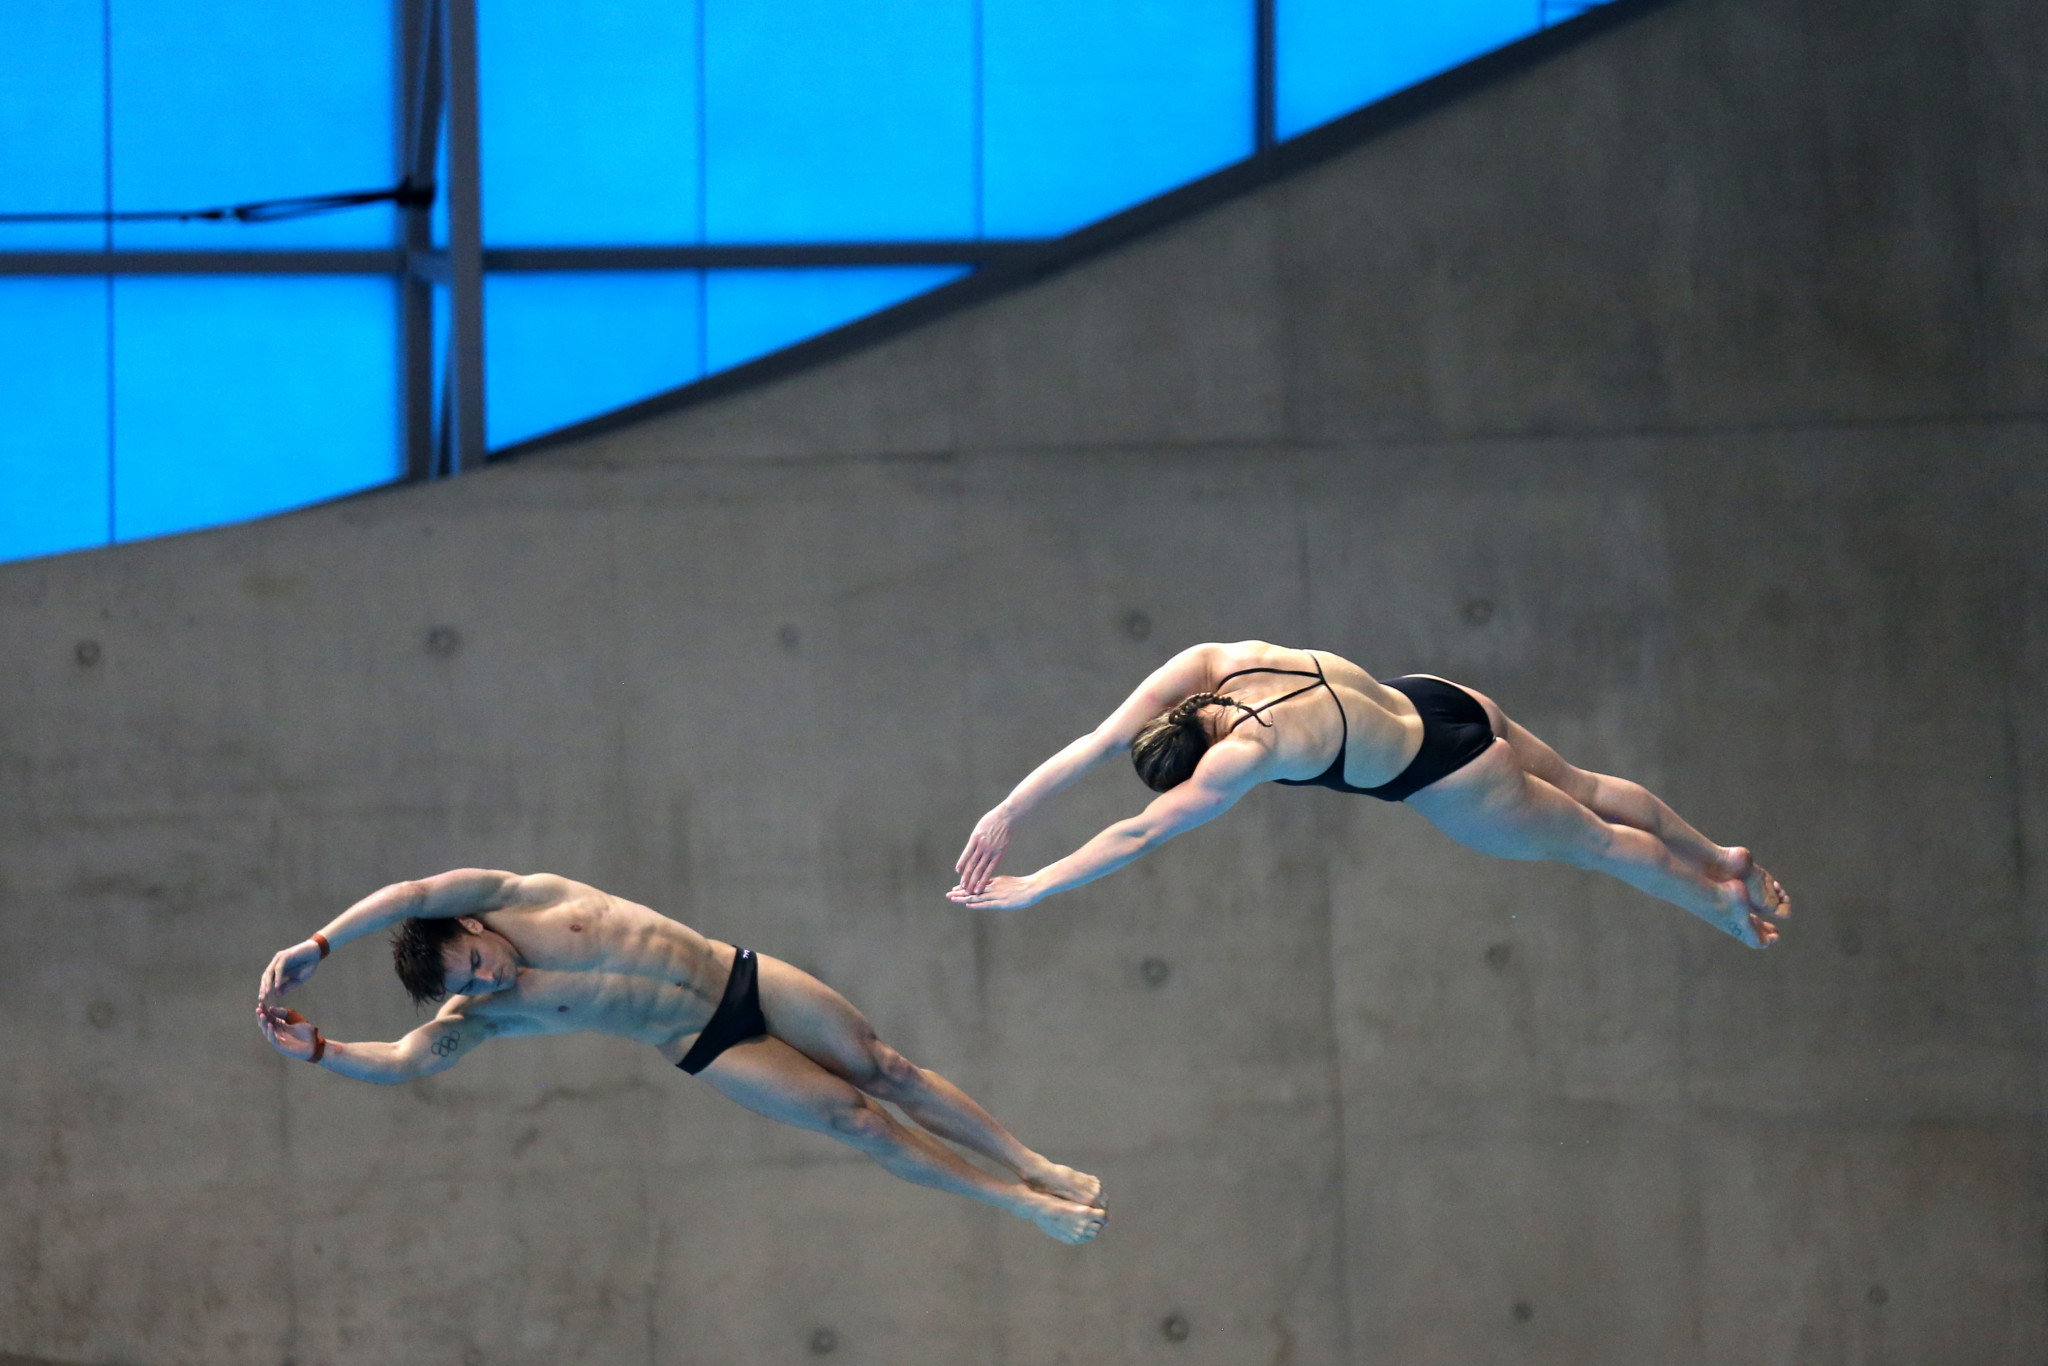 Chinese leg of FINA Diving World Series cancelled due to coronavirus outbreak